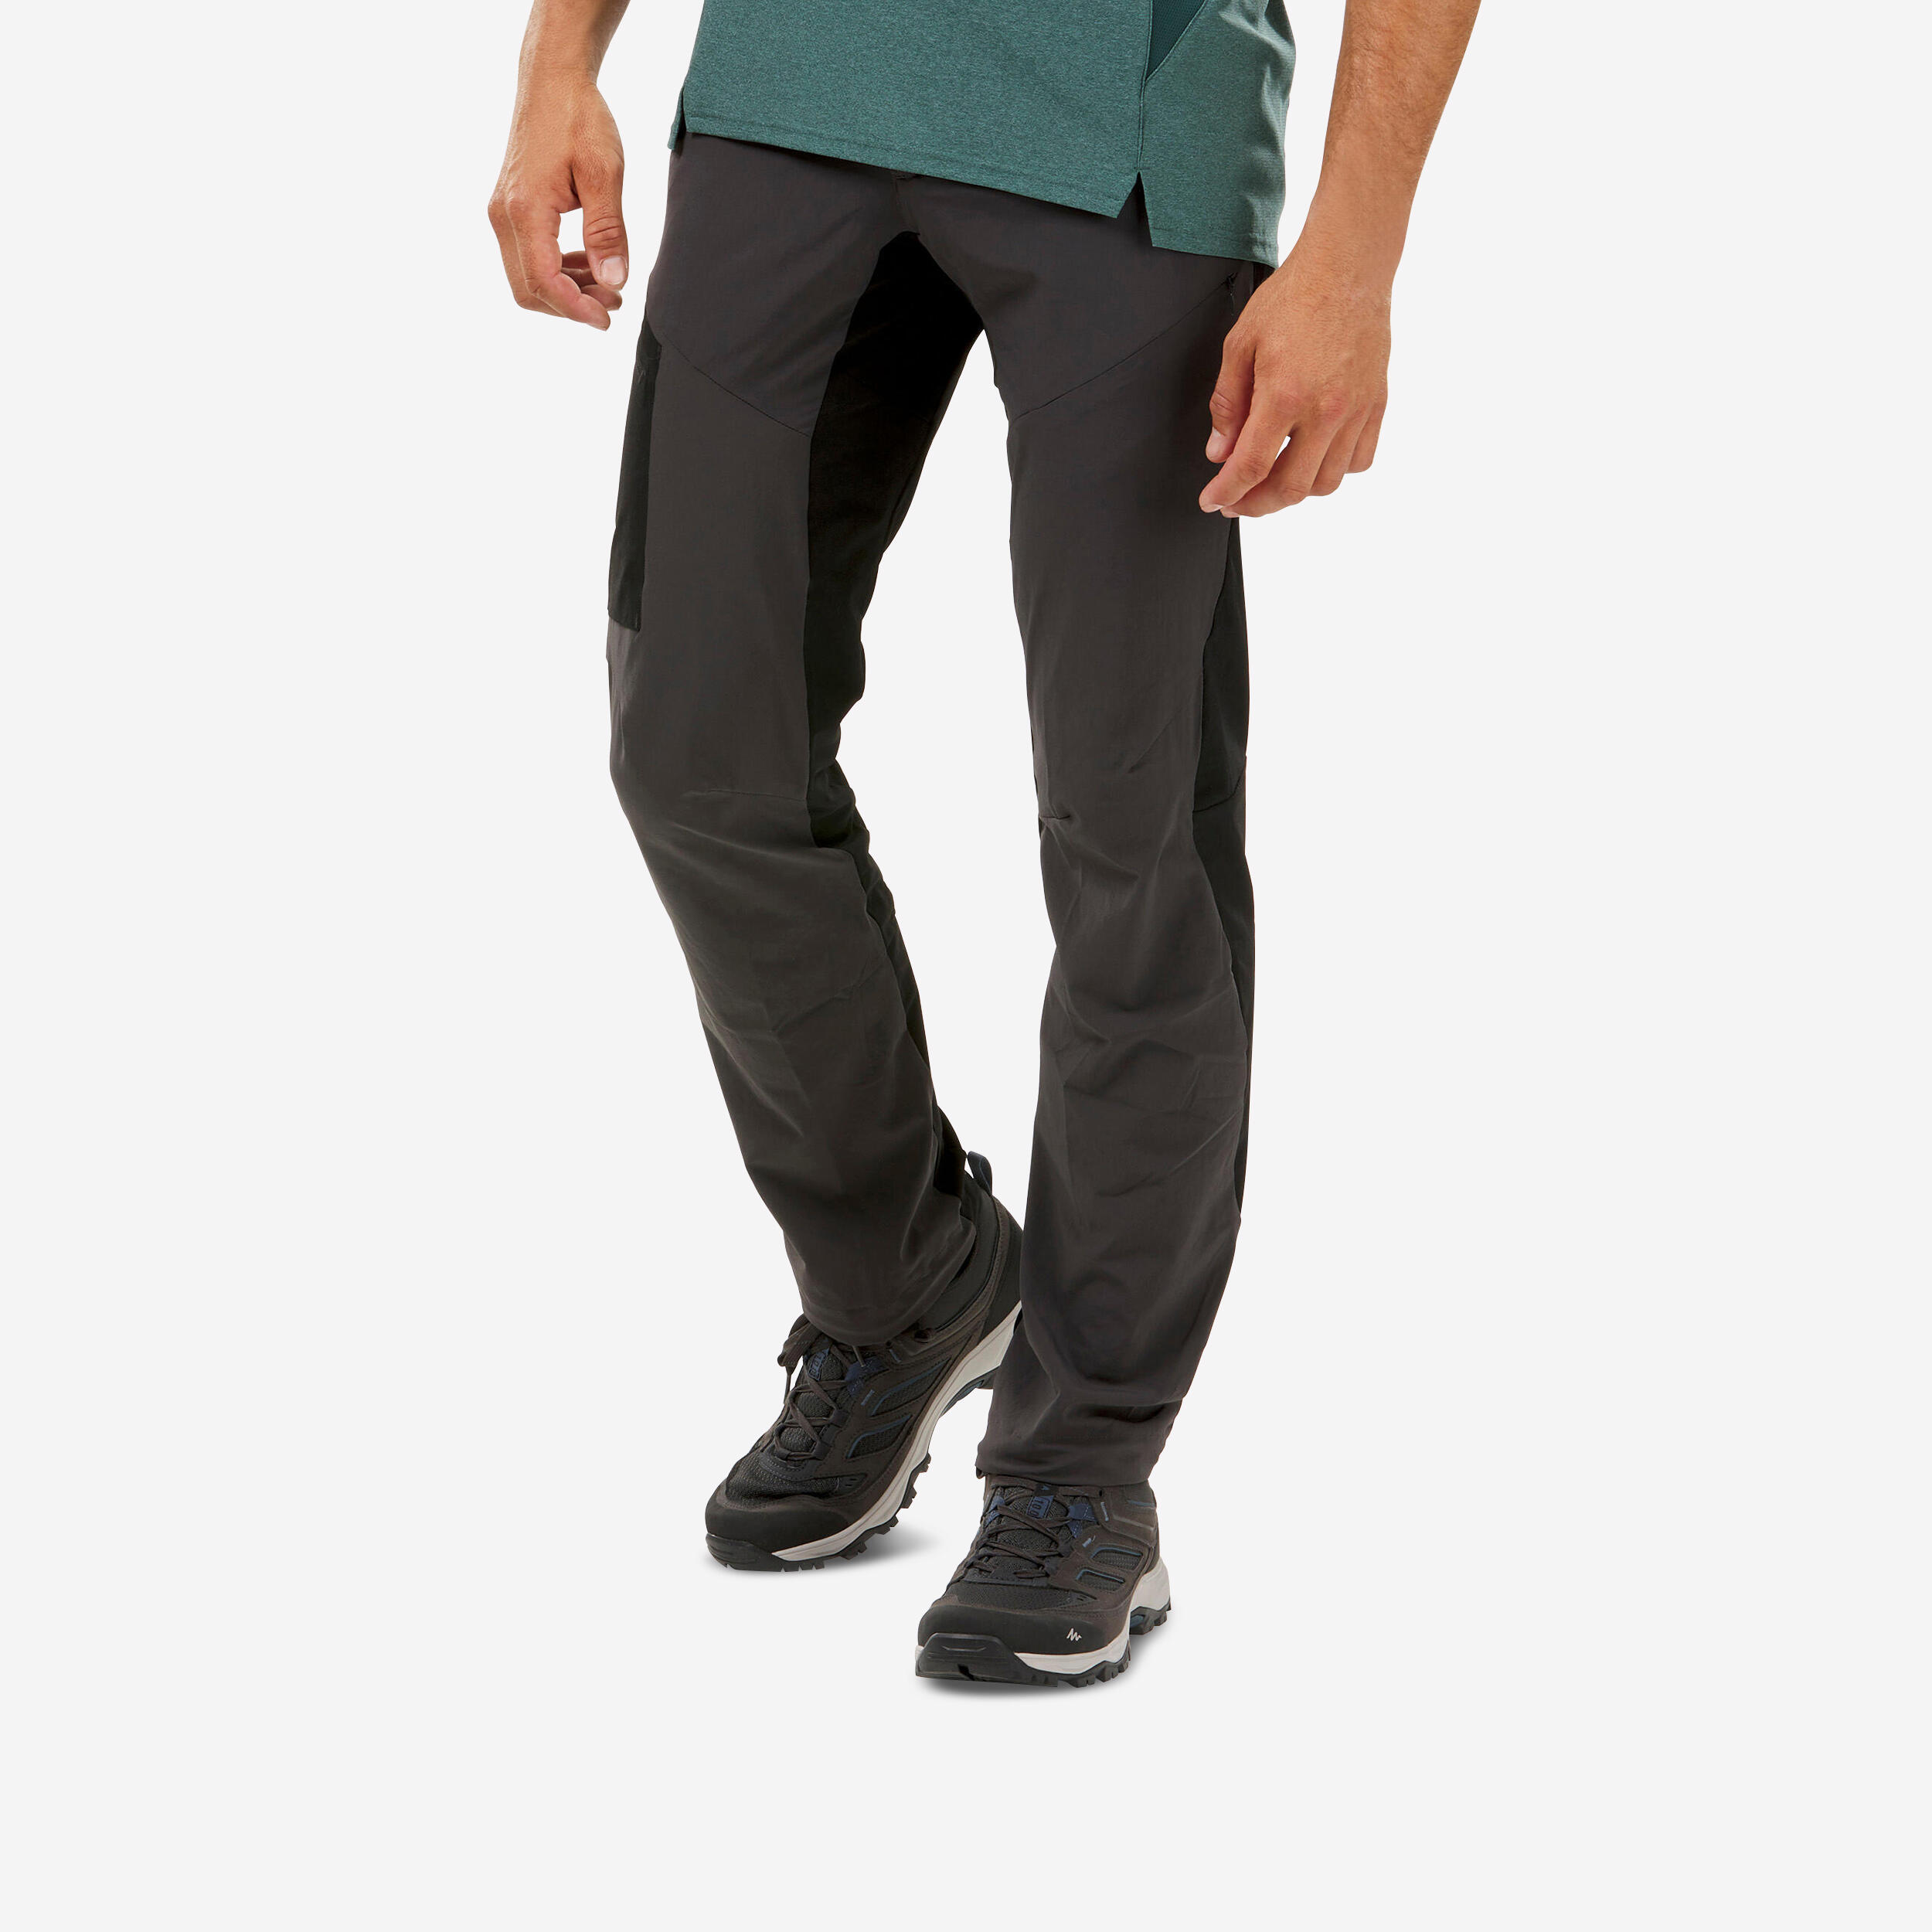 Buy QUECHUA ARPENAZ 50 Mens Pants - Khaki (EU 50) Online at Low Prices in  India - Amazon.in